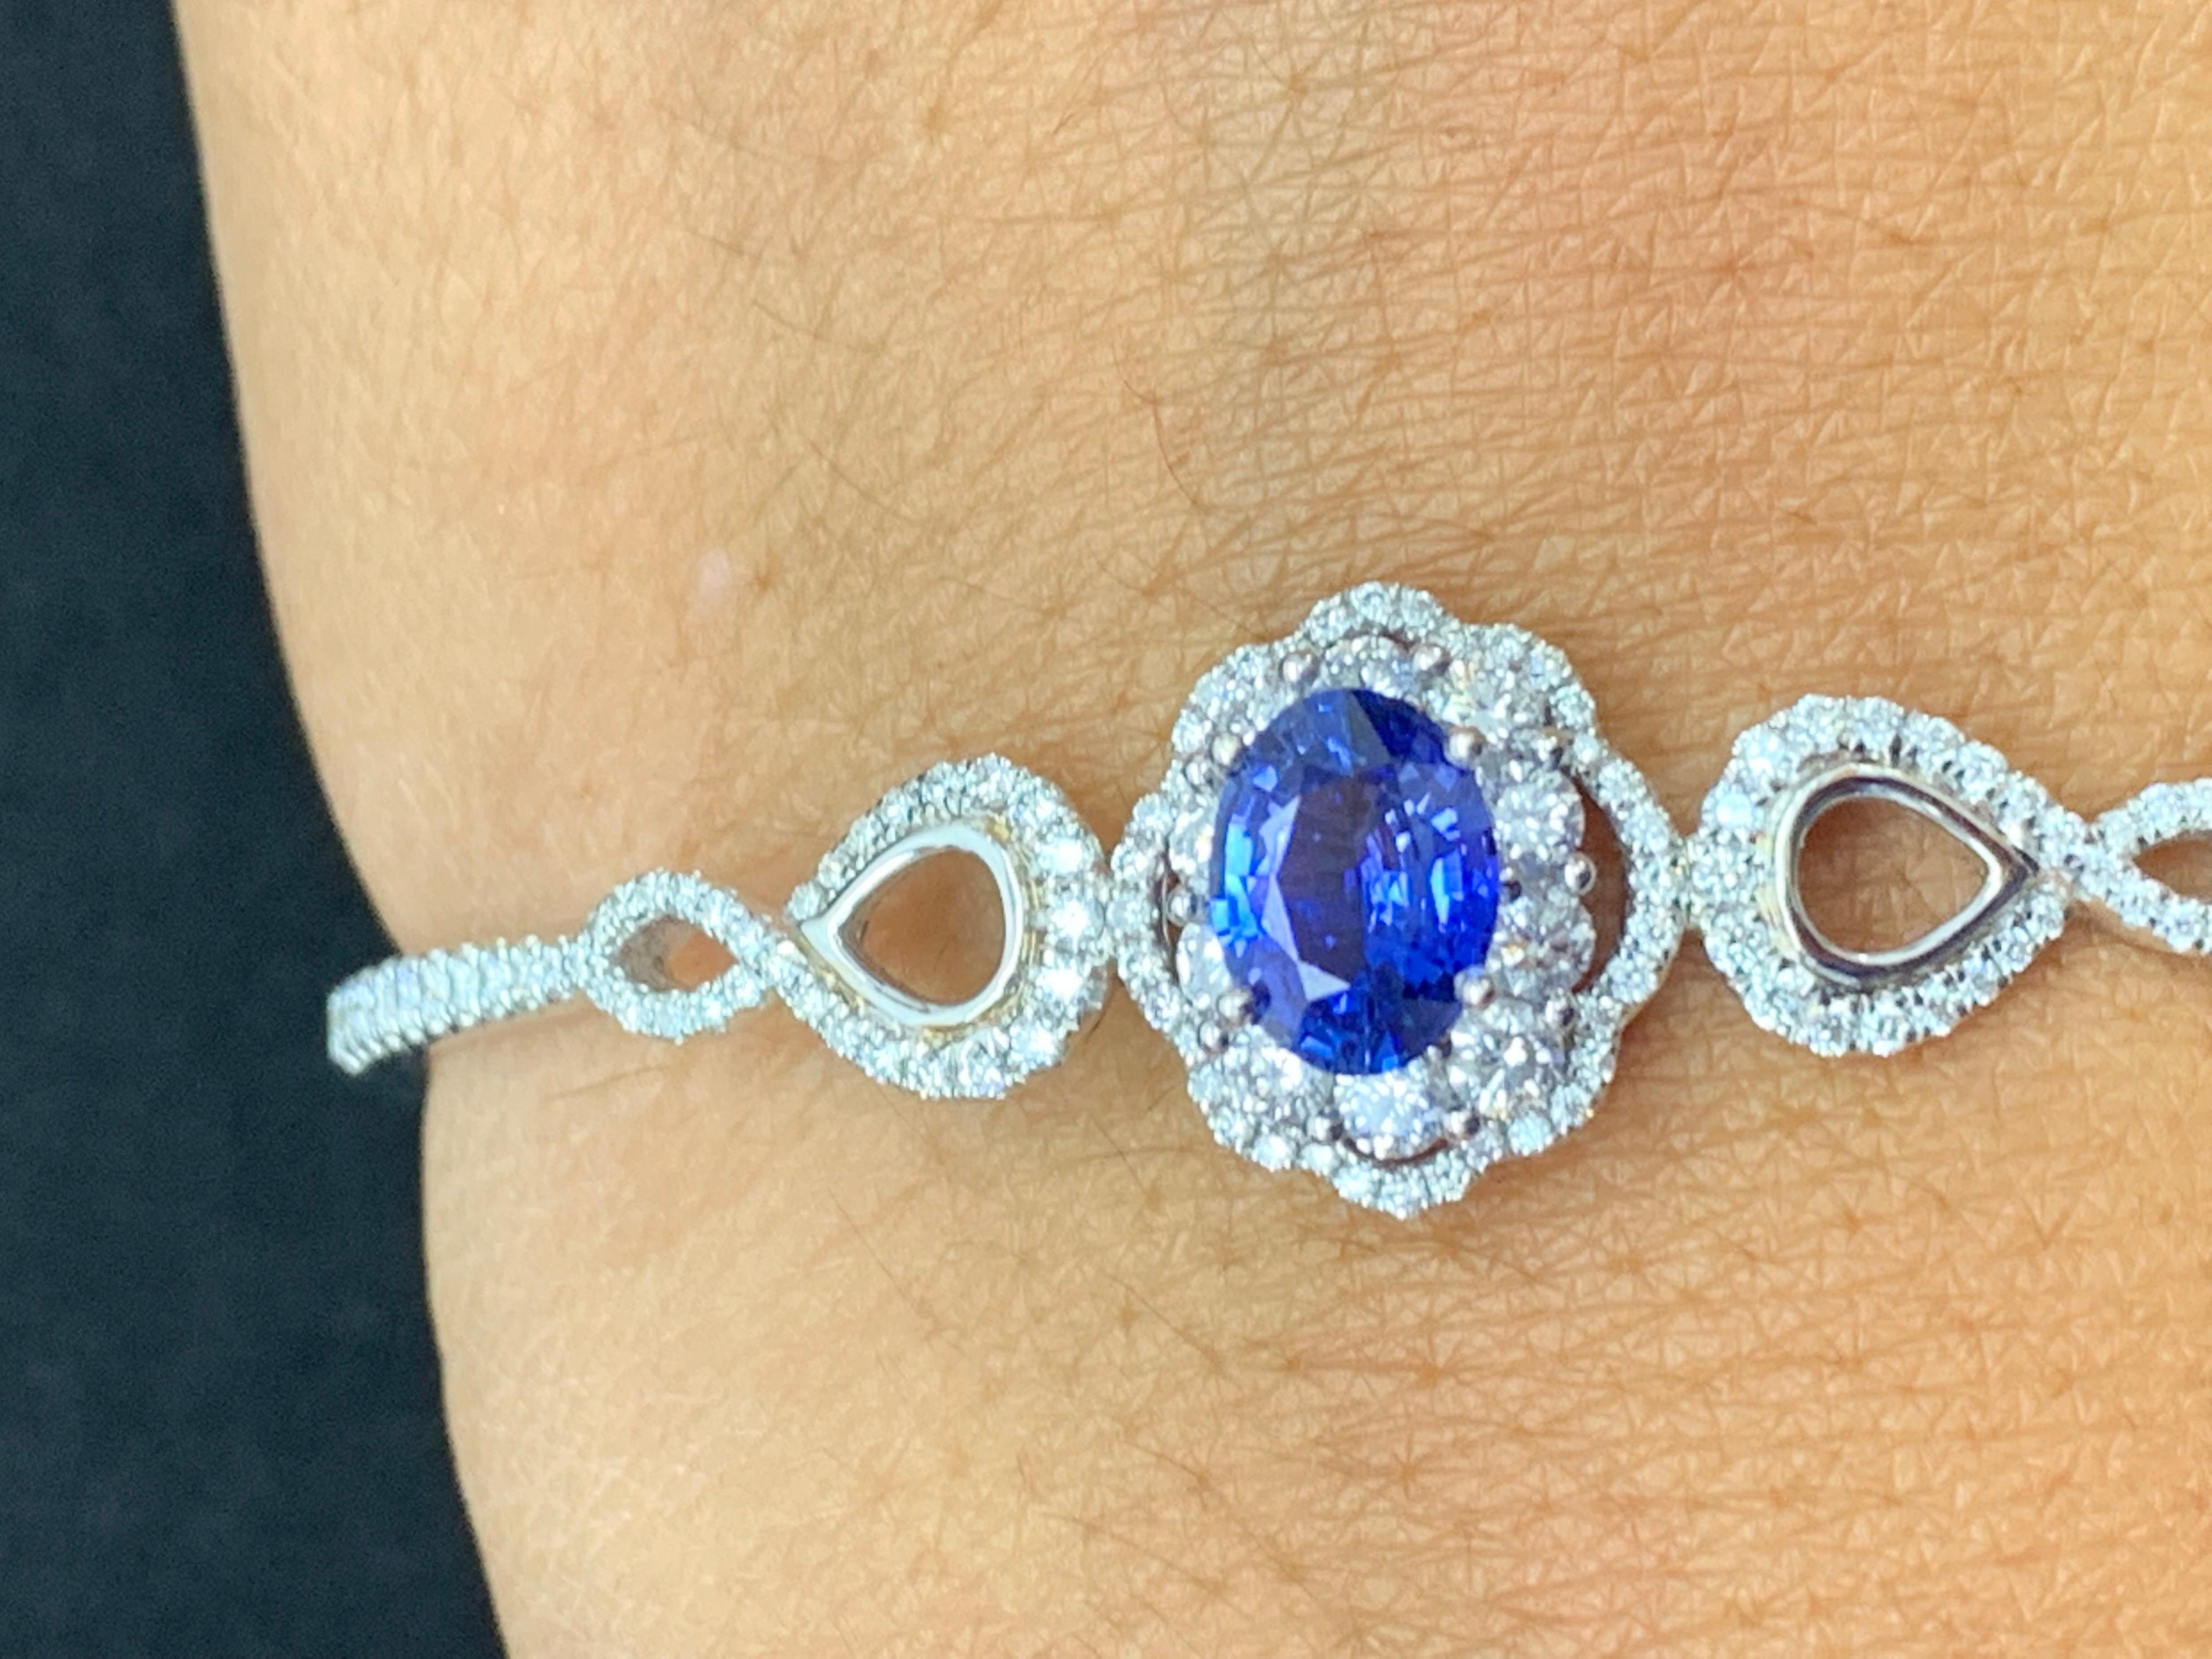 A unique and fashionable Sapphire bangle showcasing an openwork design set with 1.71 carat of Sapphire and 124 brilliant diamonds weighing 1.39 carat in total.  Made in 18k white gold.

Style available in different price ranges. Prices are based on